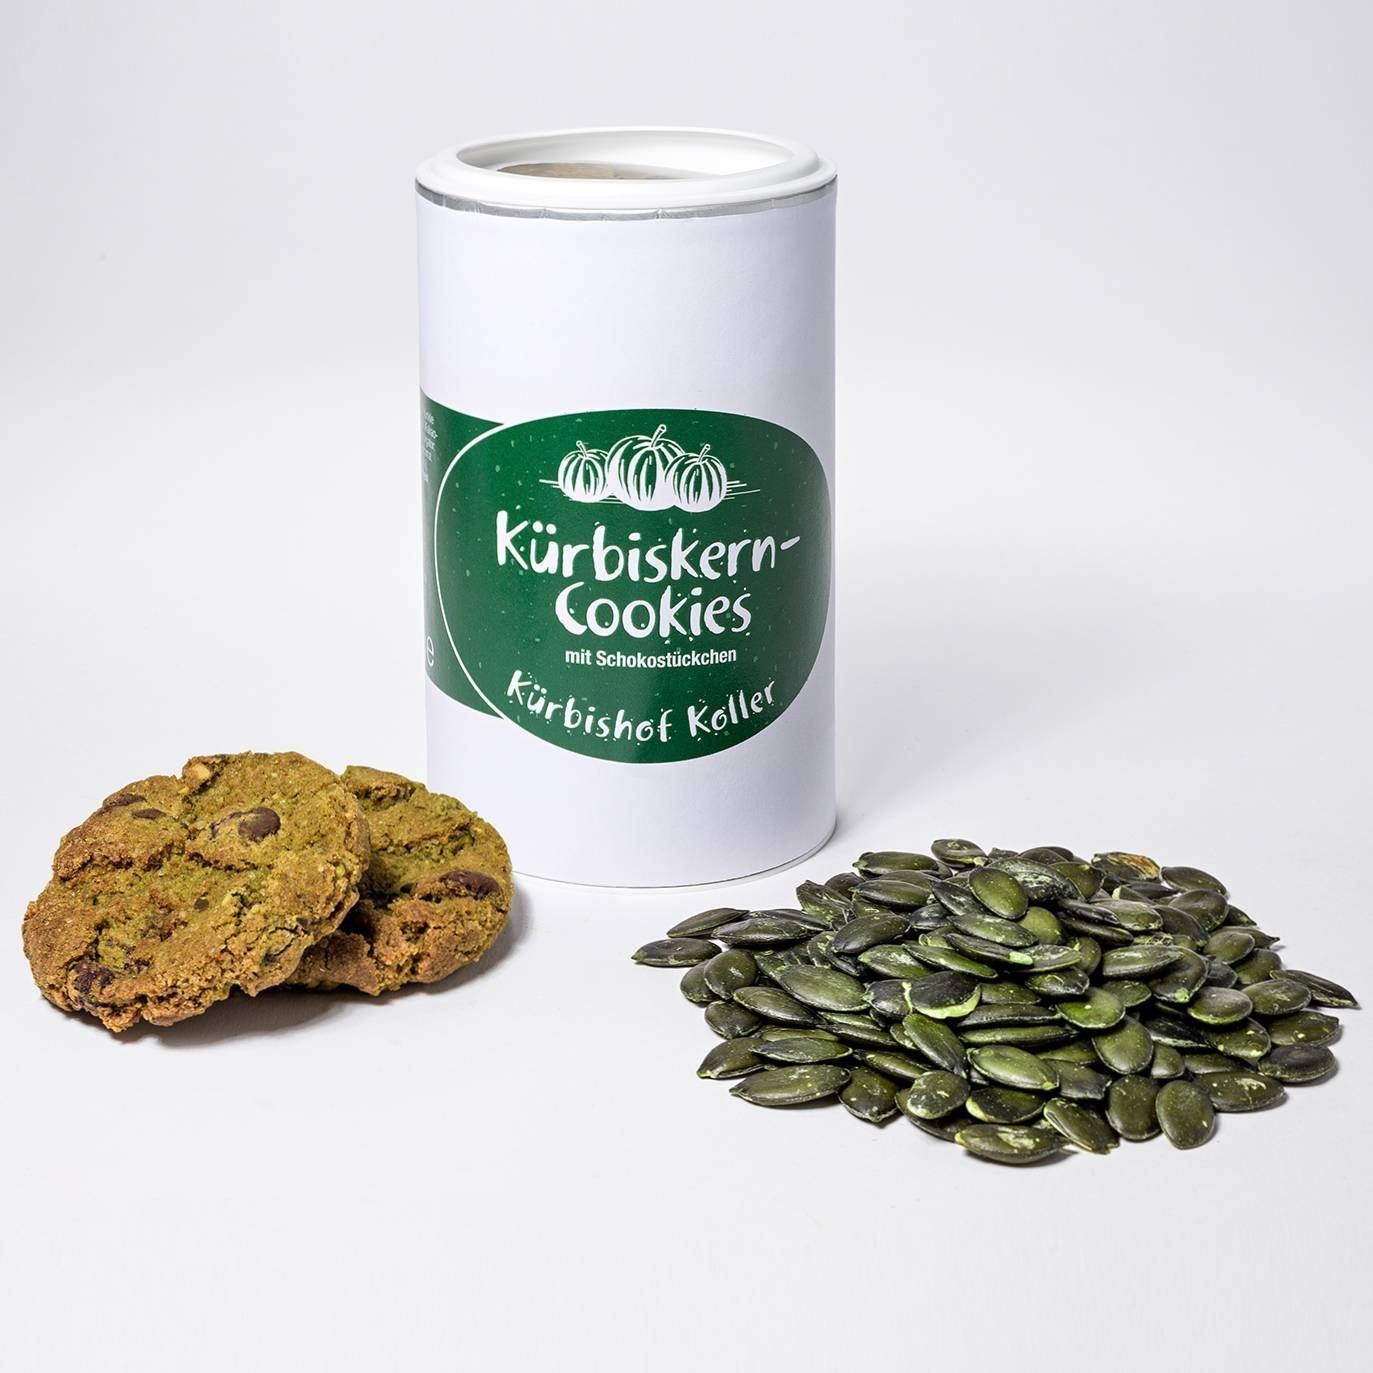 Pumpkin Seed Cookies with Chocolate Chips on the Philippines